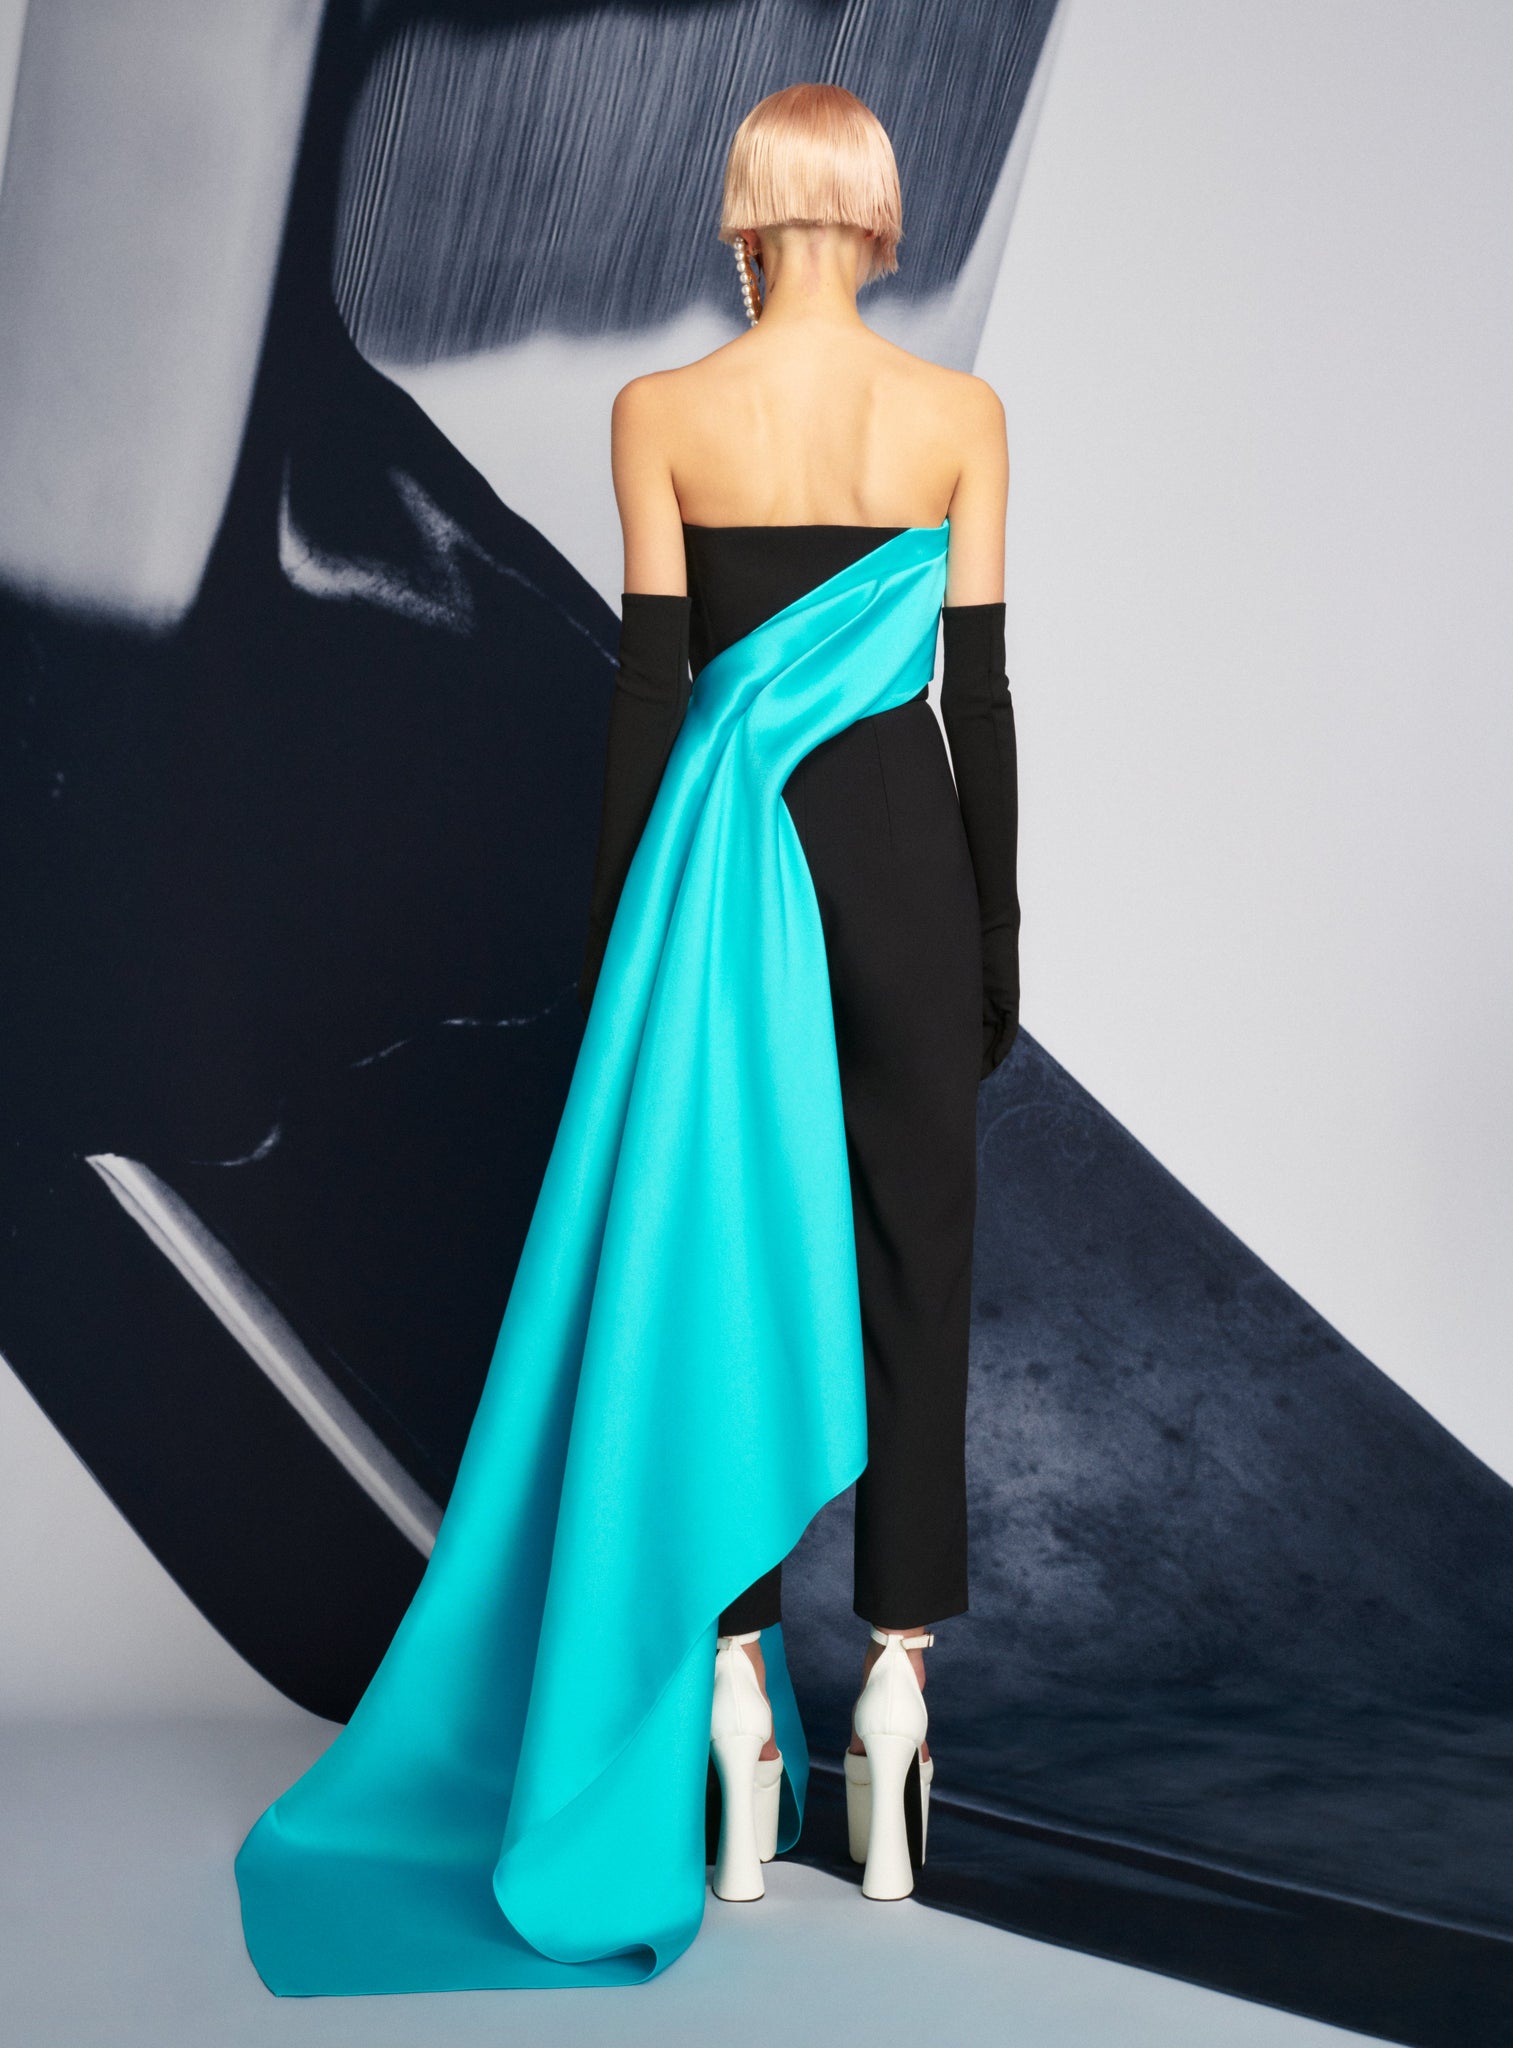 The Harlow Jumpsuit in Turquoise & Black